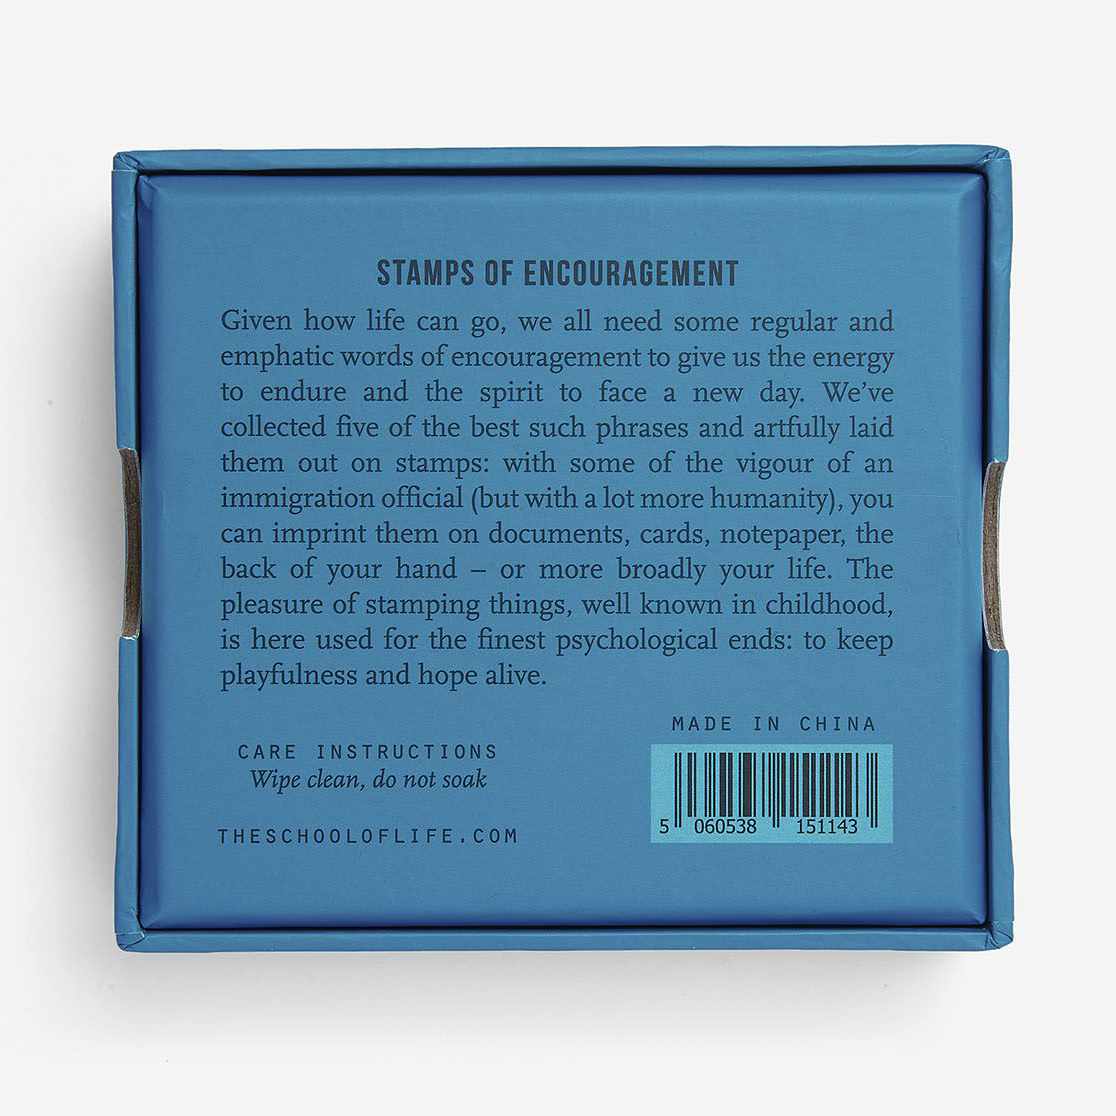 STAMPS OF ENCOURAGEMENT | STEMPEL-SET | The School of Life - Charles & Marie